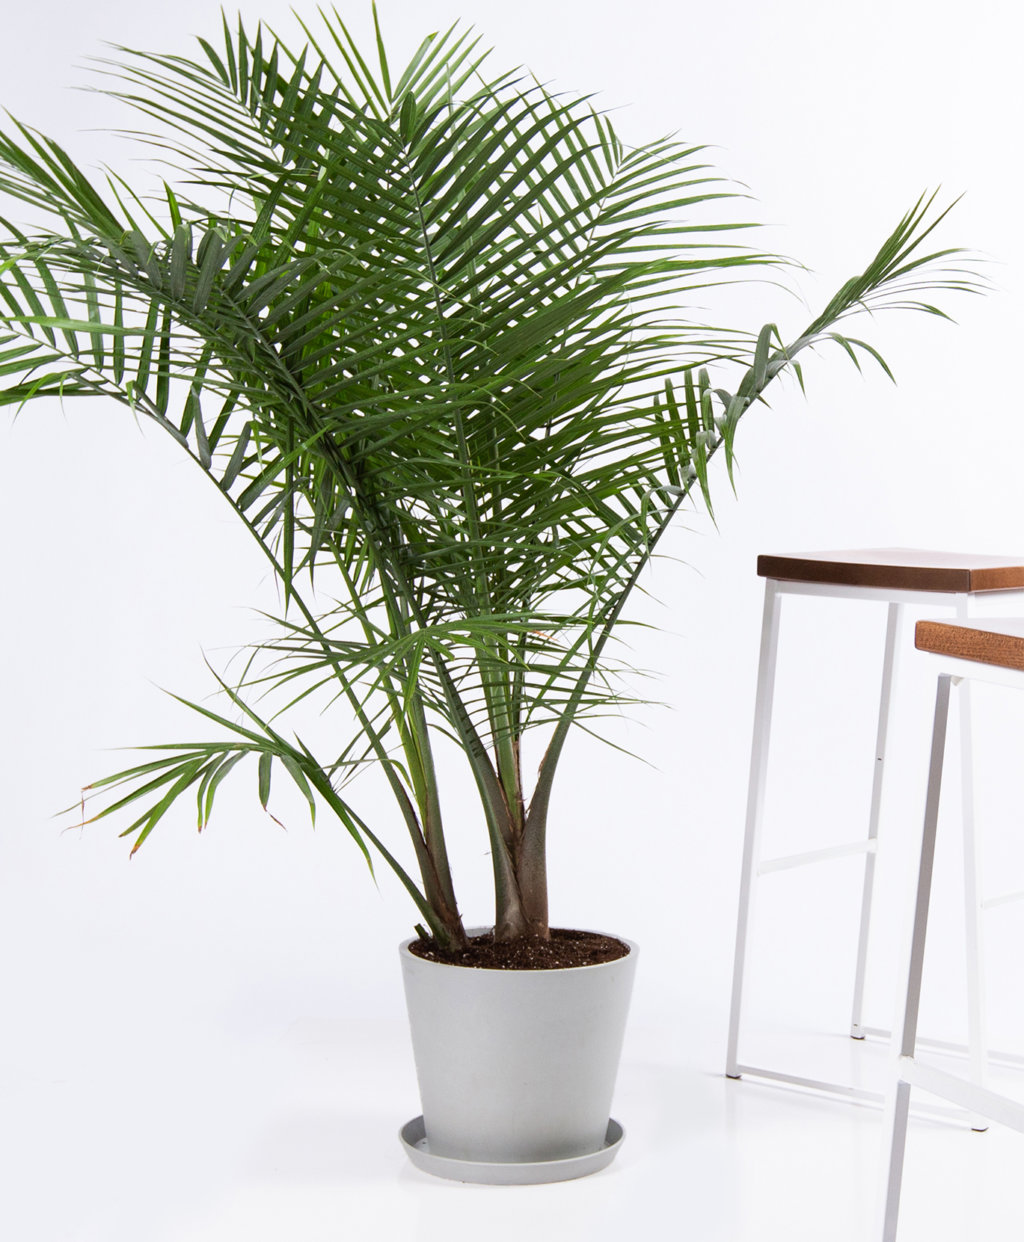  Buy  Large Potted Majesty Palm Indoor  Plant  Bloomscape